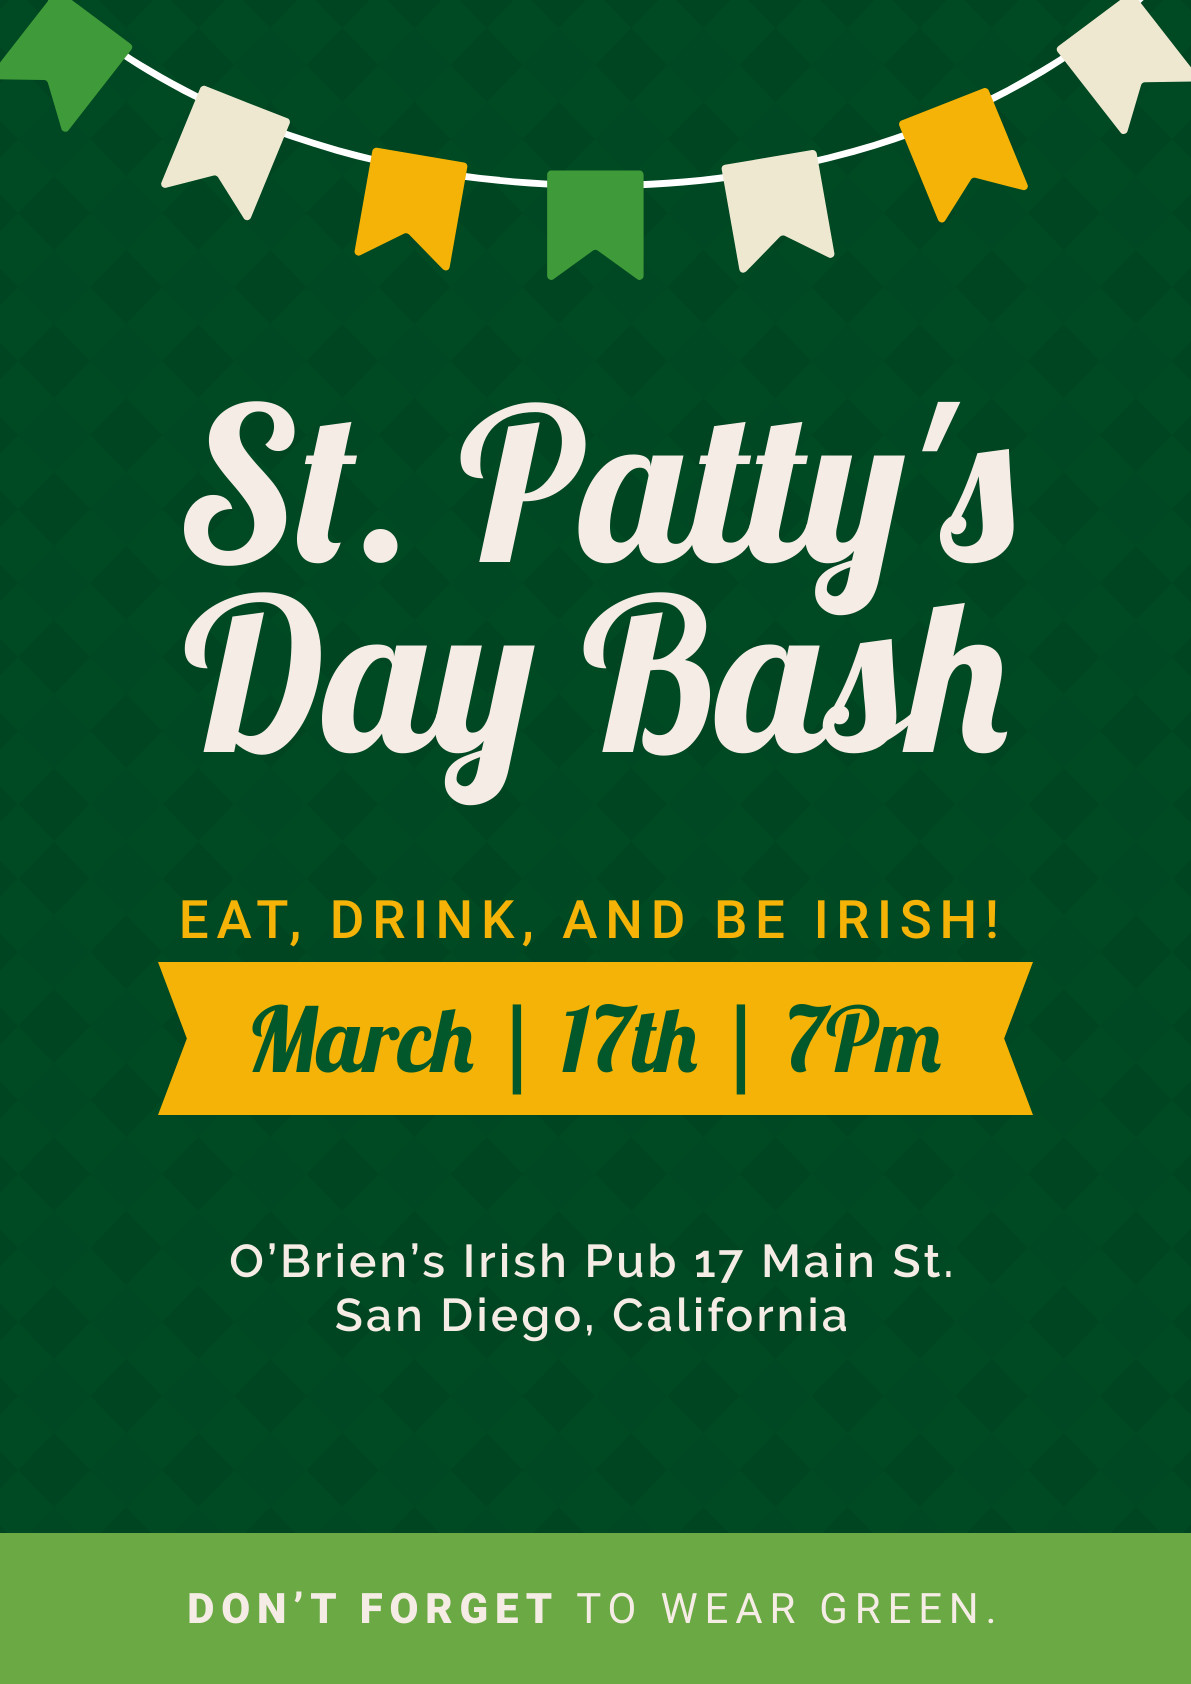 Saint Patrick's Green Day Bash –  Poster Template 1191x1684